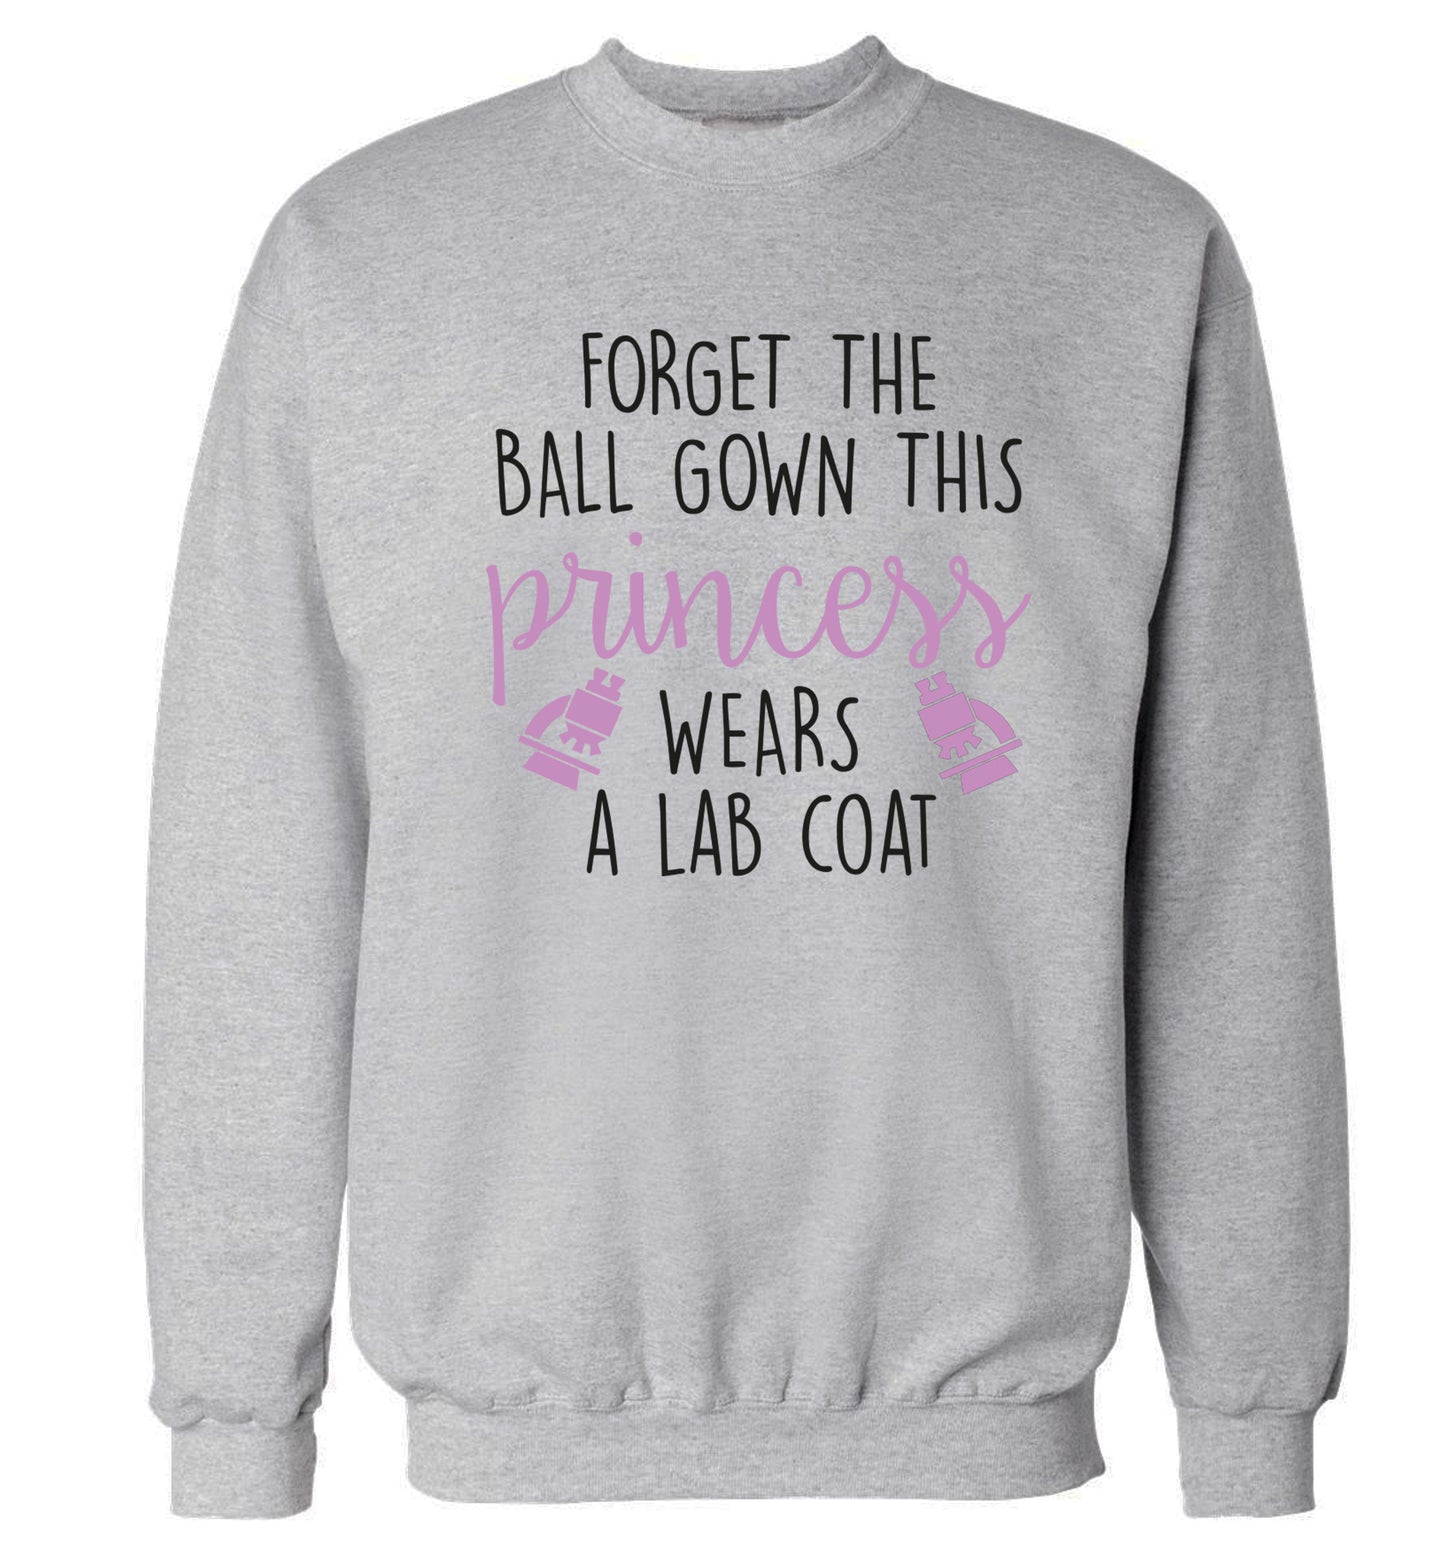 Forget the ball gown this princess wears a lab coat Adult's unisex grey Sweater 2XL